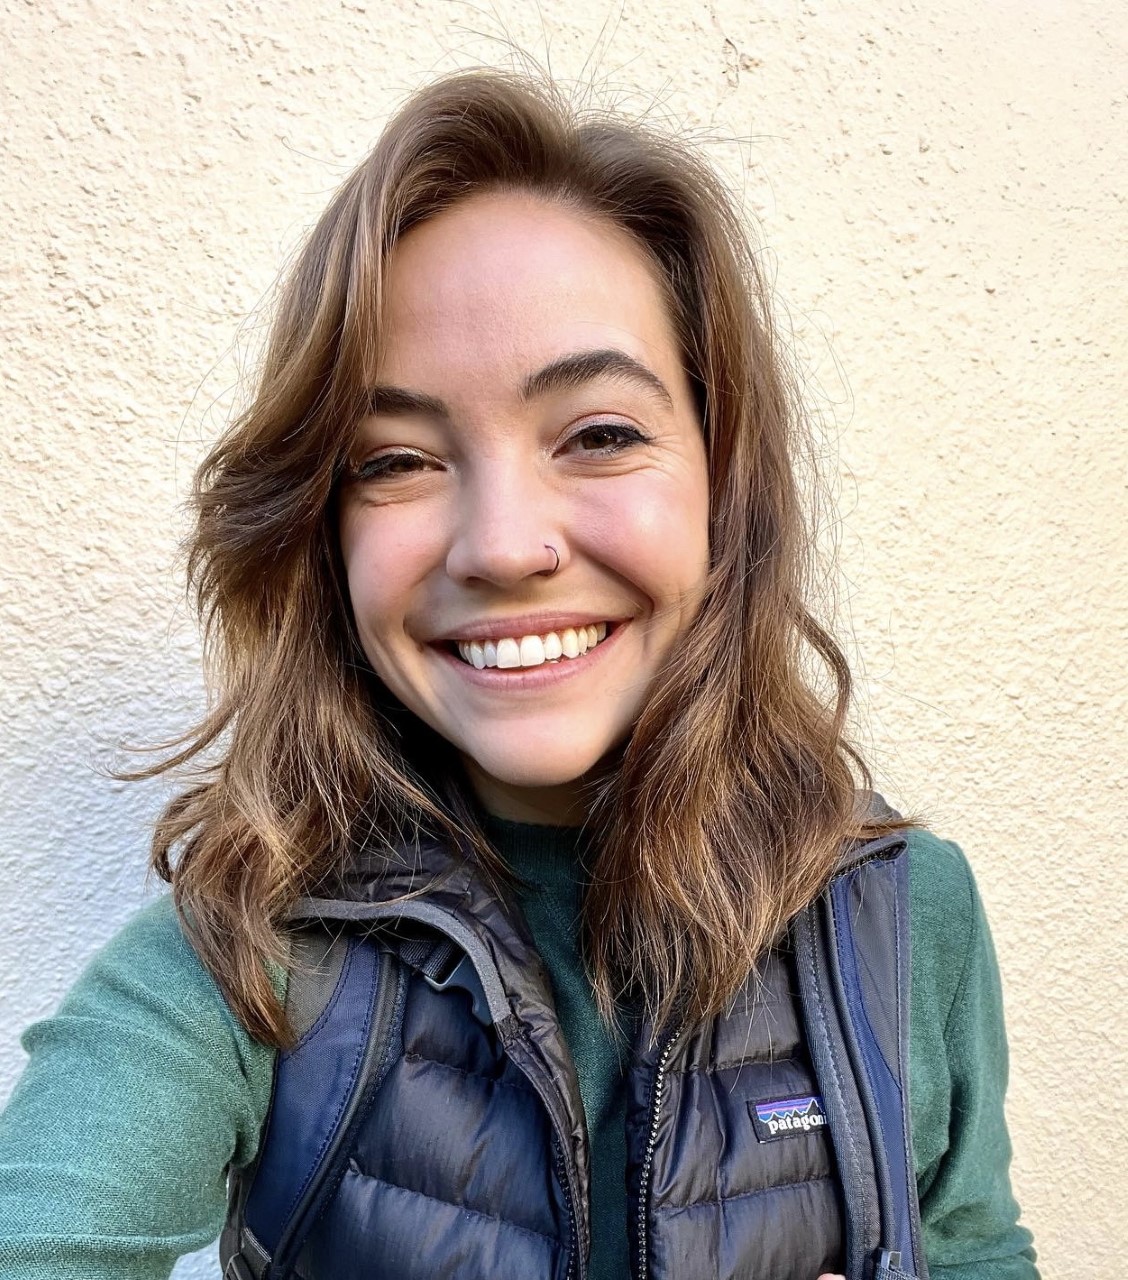 Color photo of Suze. She has shoulder-length medium brown hair and has a big smile on her face. She is wearing a green sweater and puffy black vest.